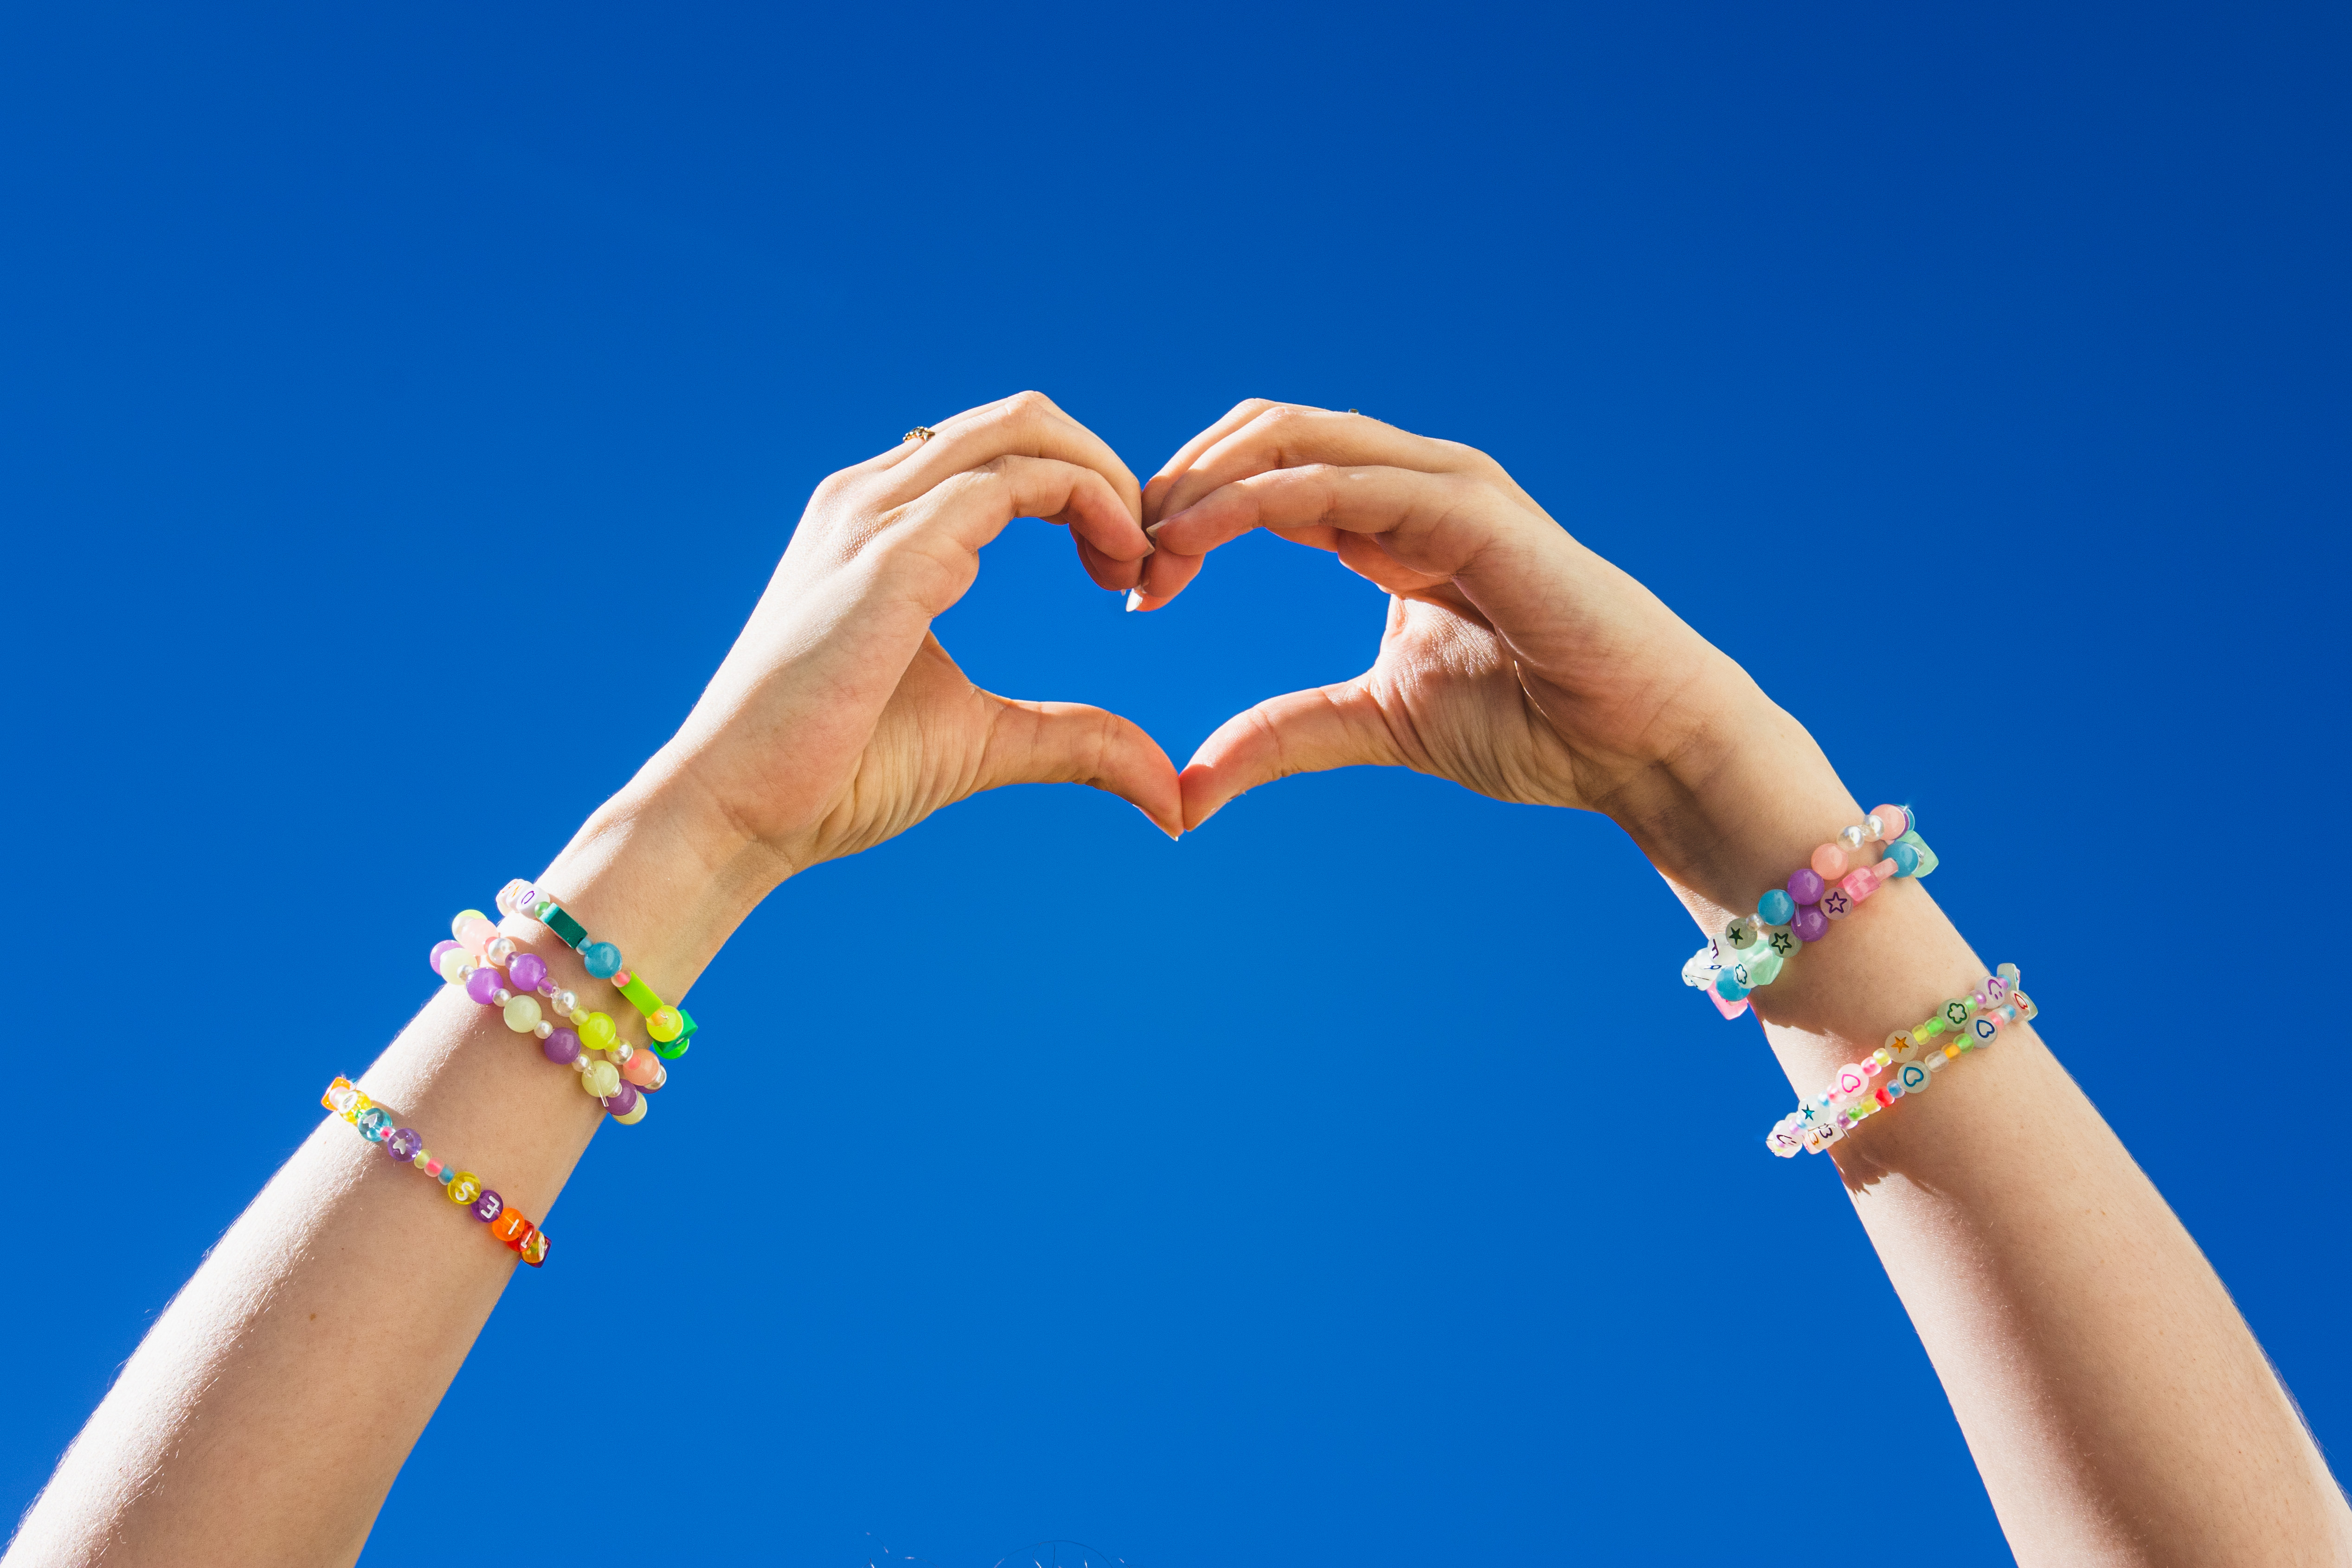 Pair of hands forming a love heart with friendship bracelets